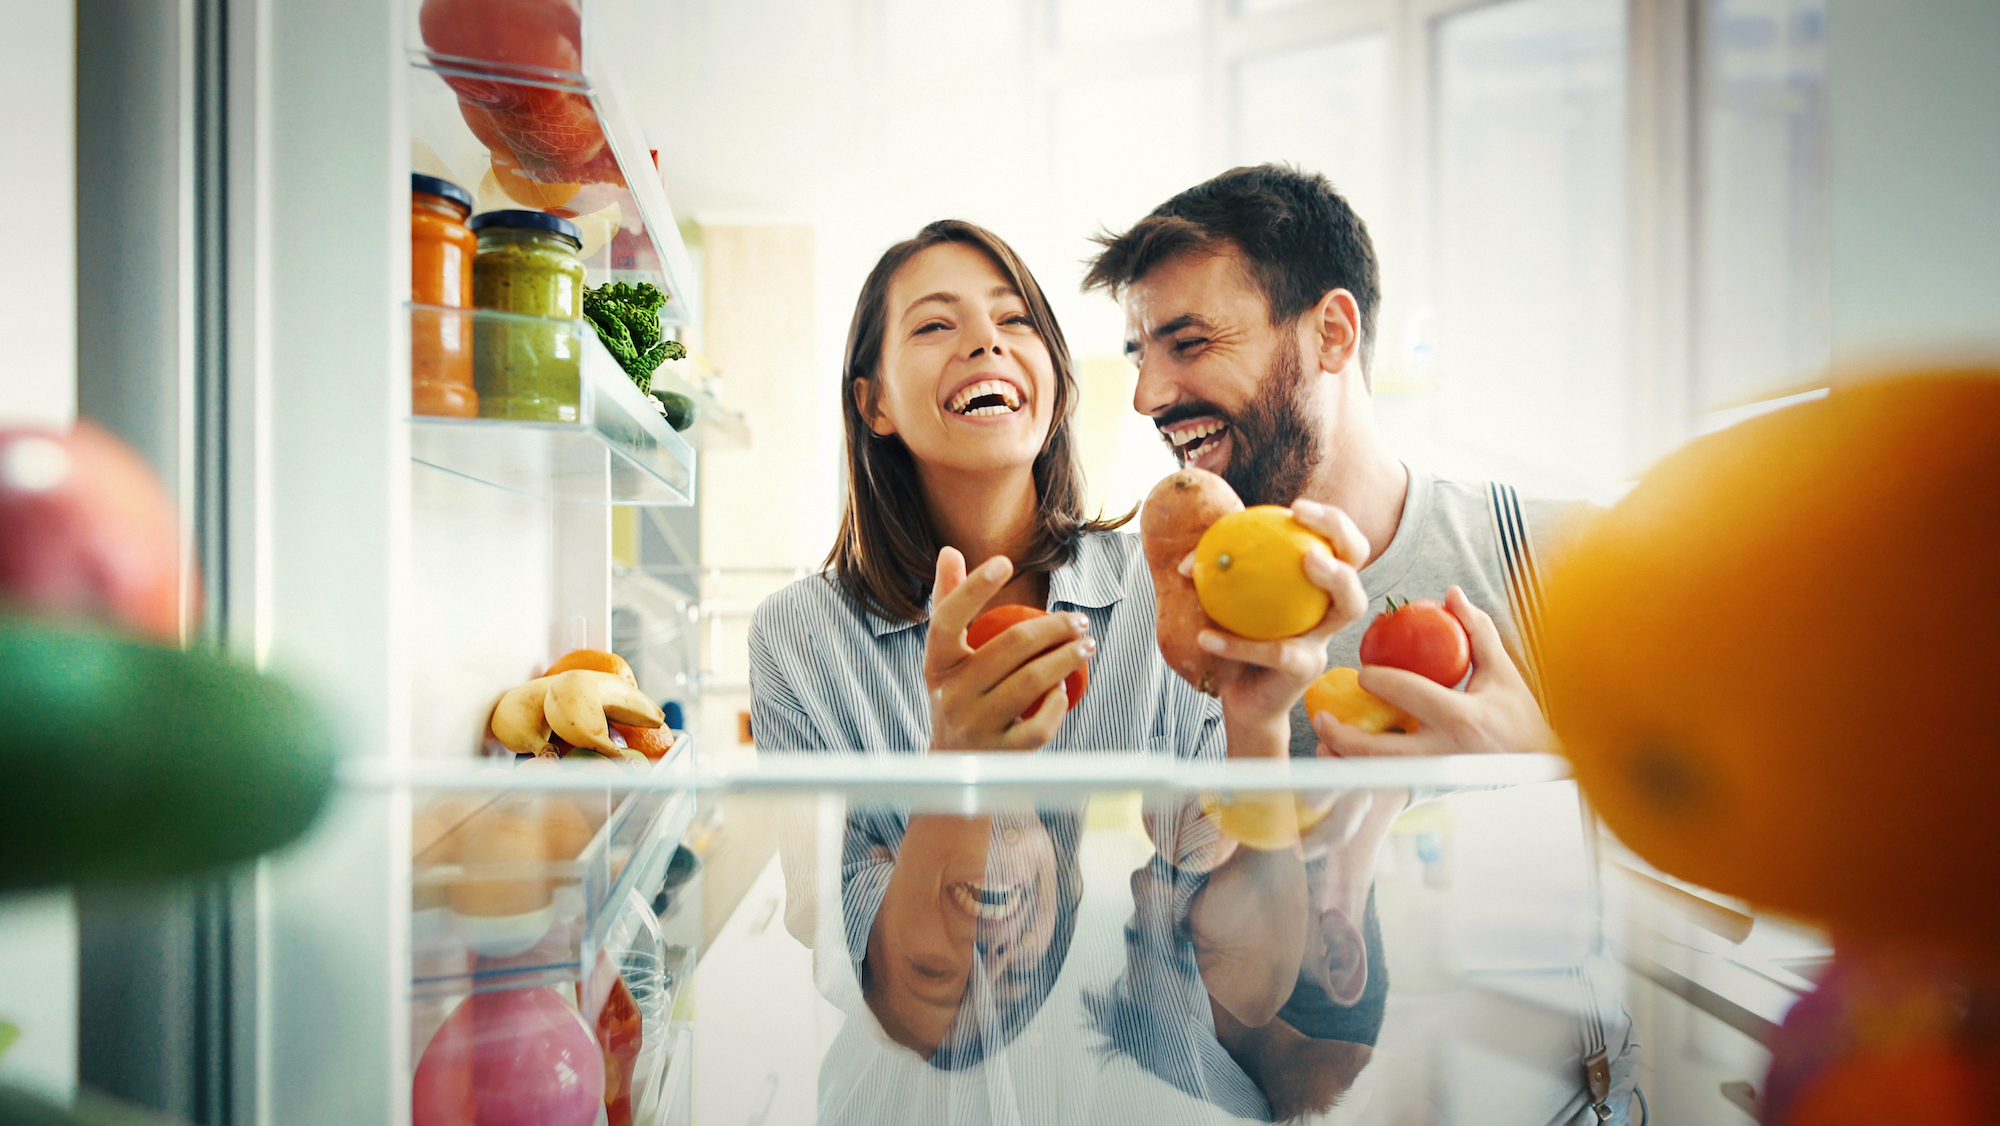 Man and woman laughing while picking fruits and veggies from the fridge, enjoying their air purification system